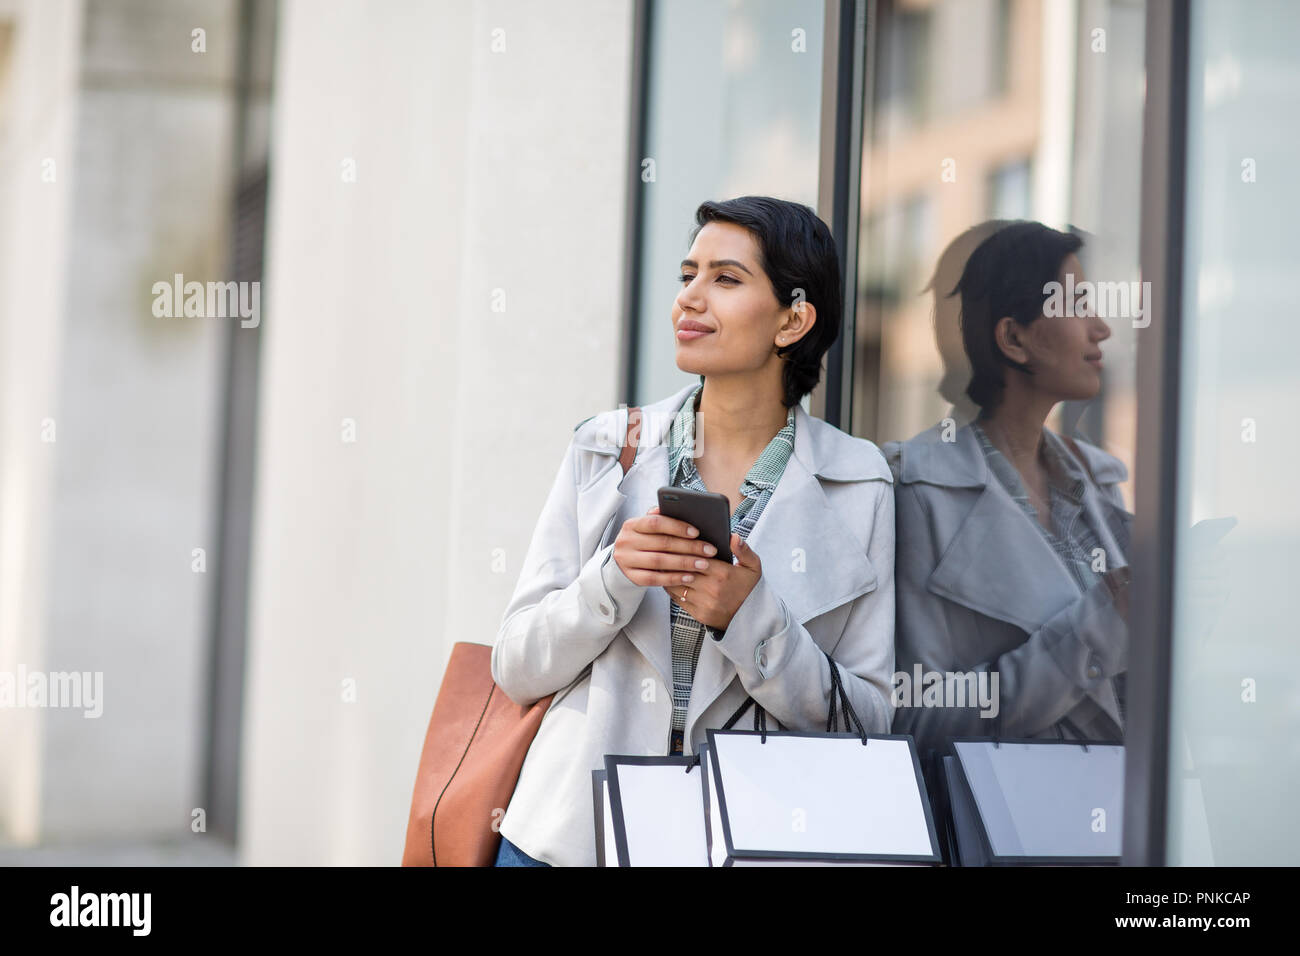 Arabic woman using a smartphone on a shopping trip Stock Photo